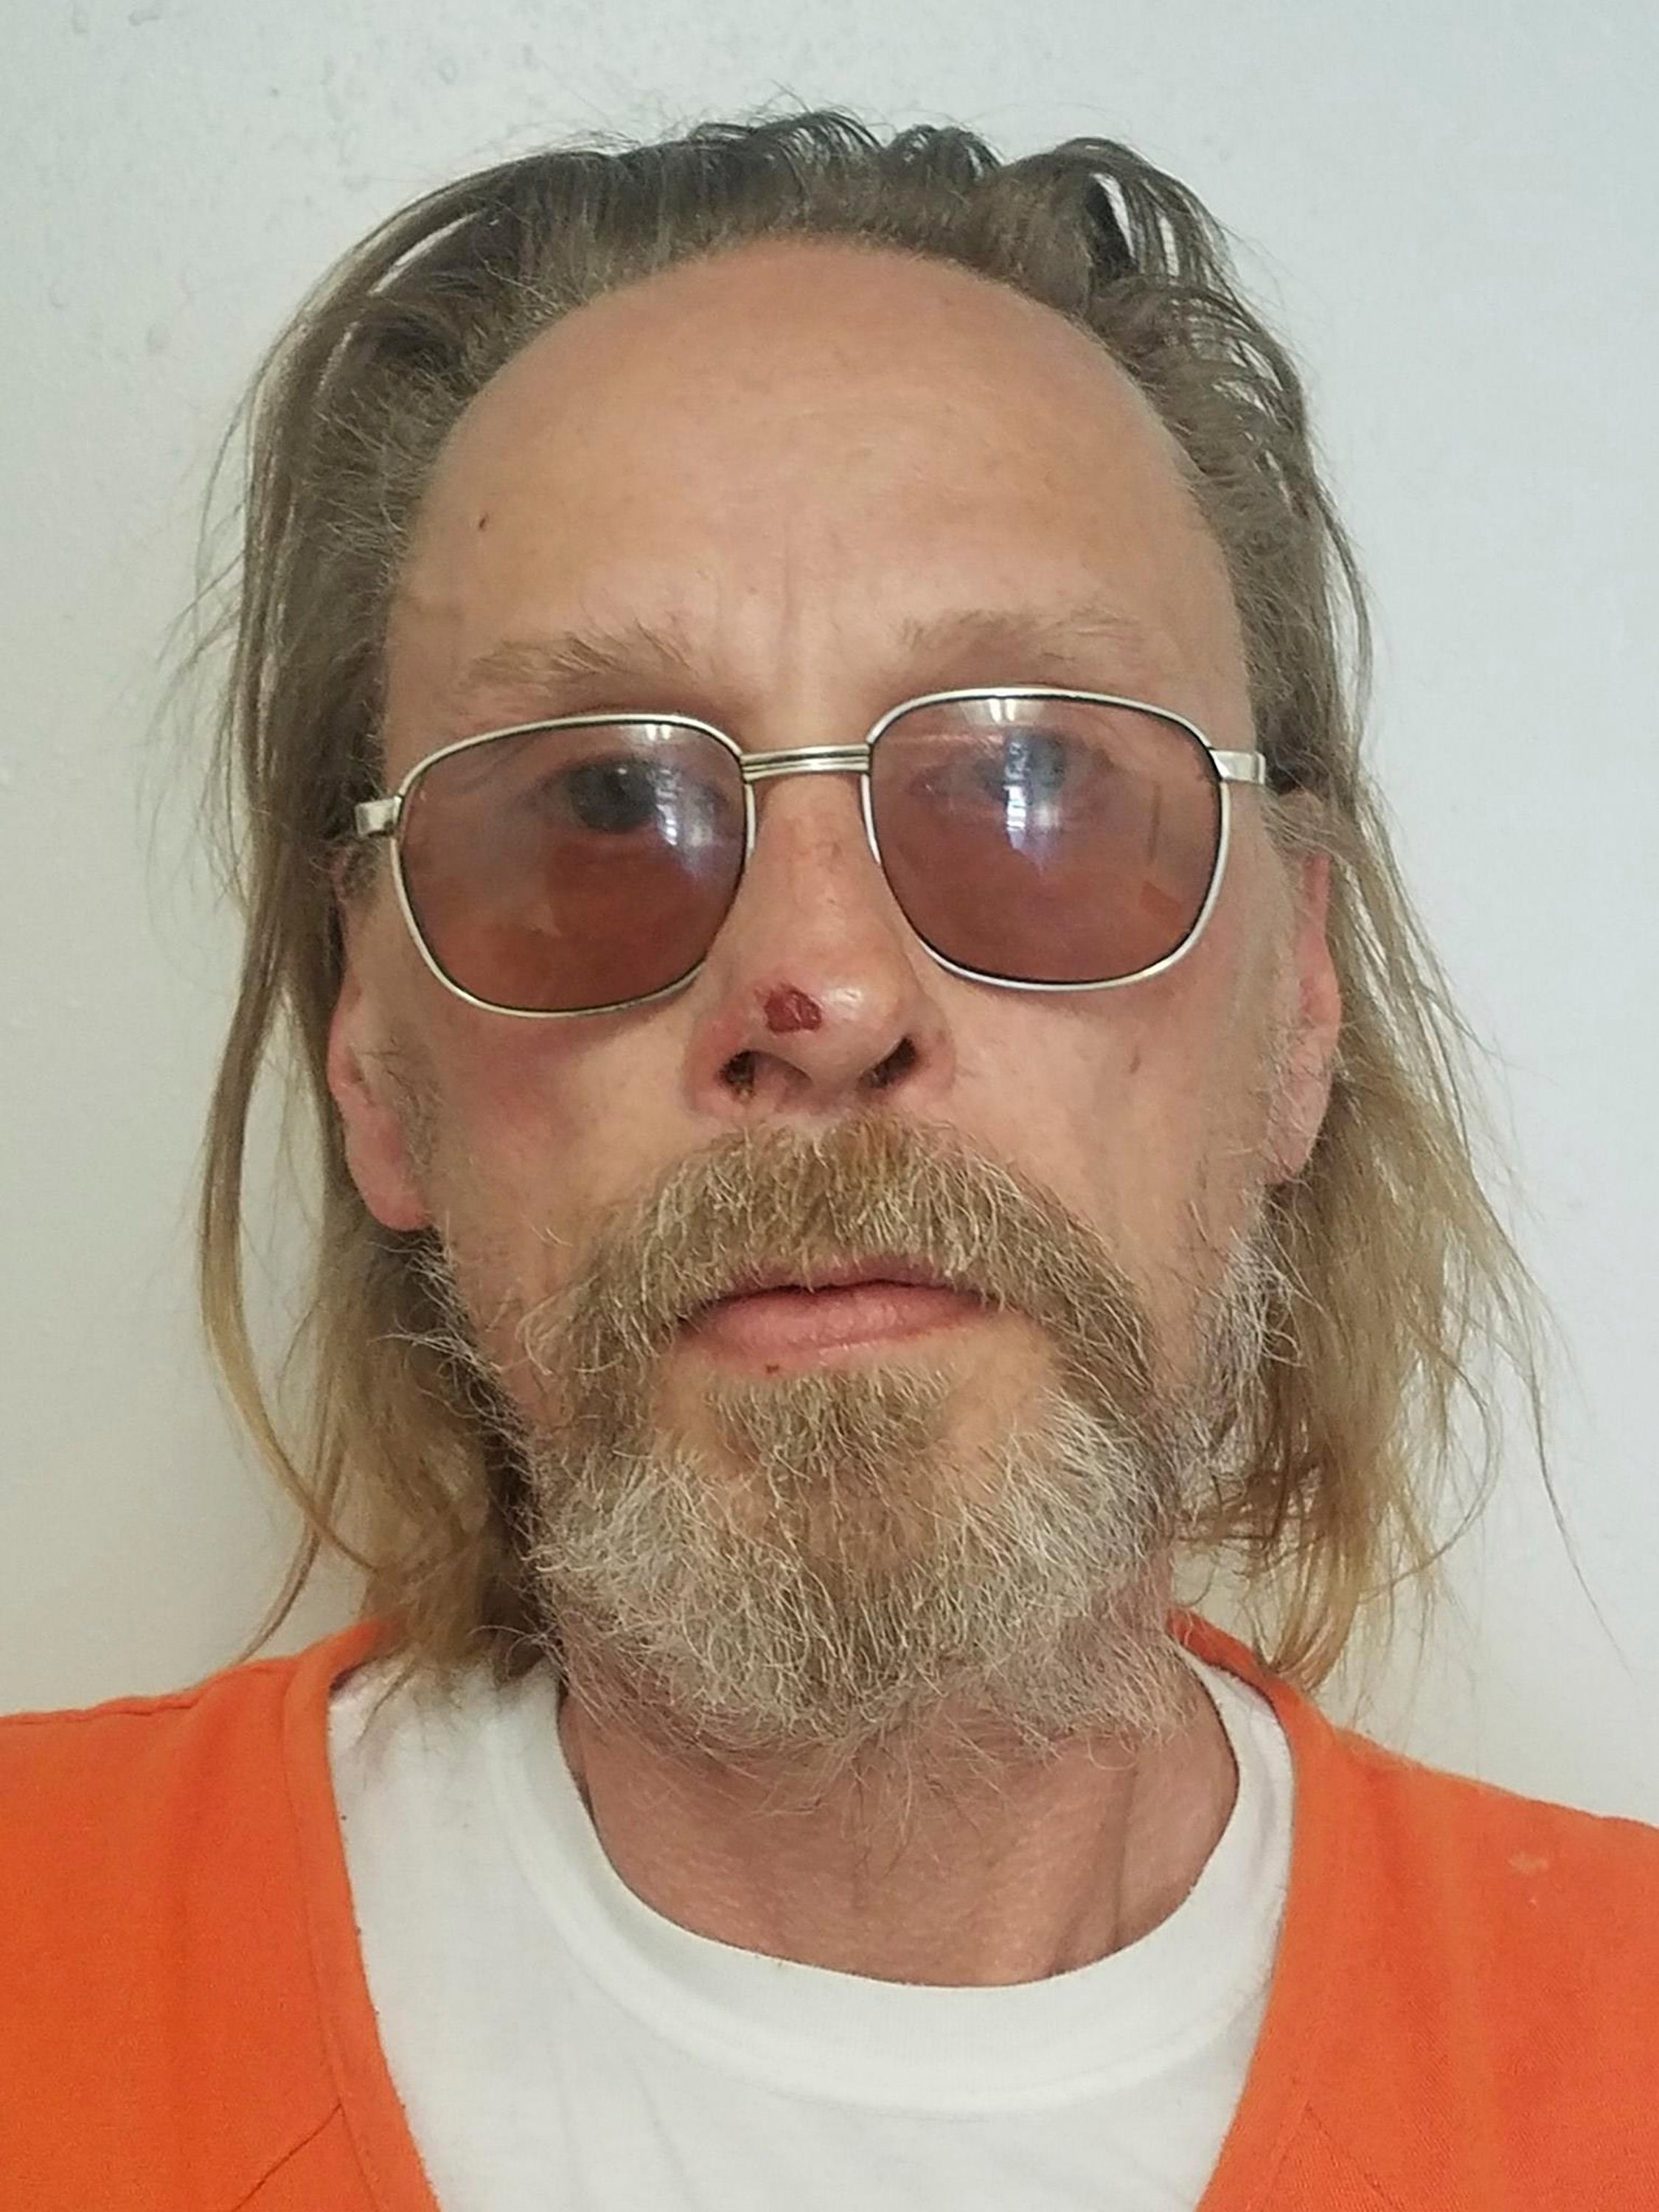 File: Jesper Joergensen, accused of starting a wildfire in Colorado in 2018, has been put on forced medication.